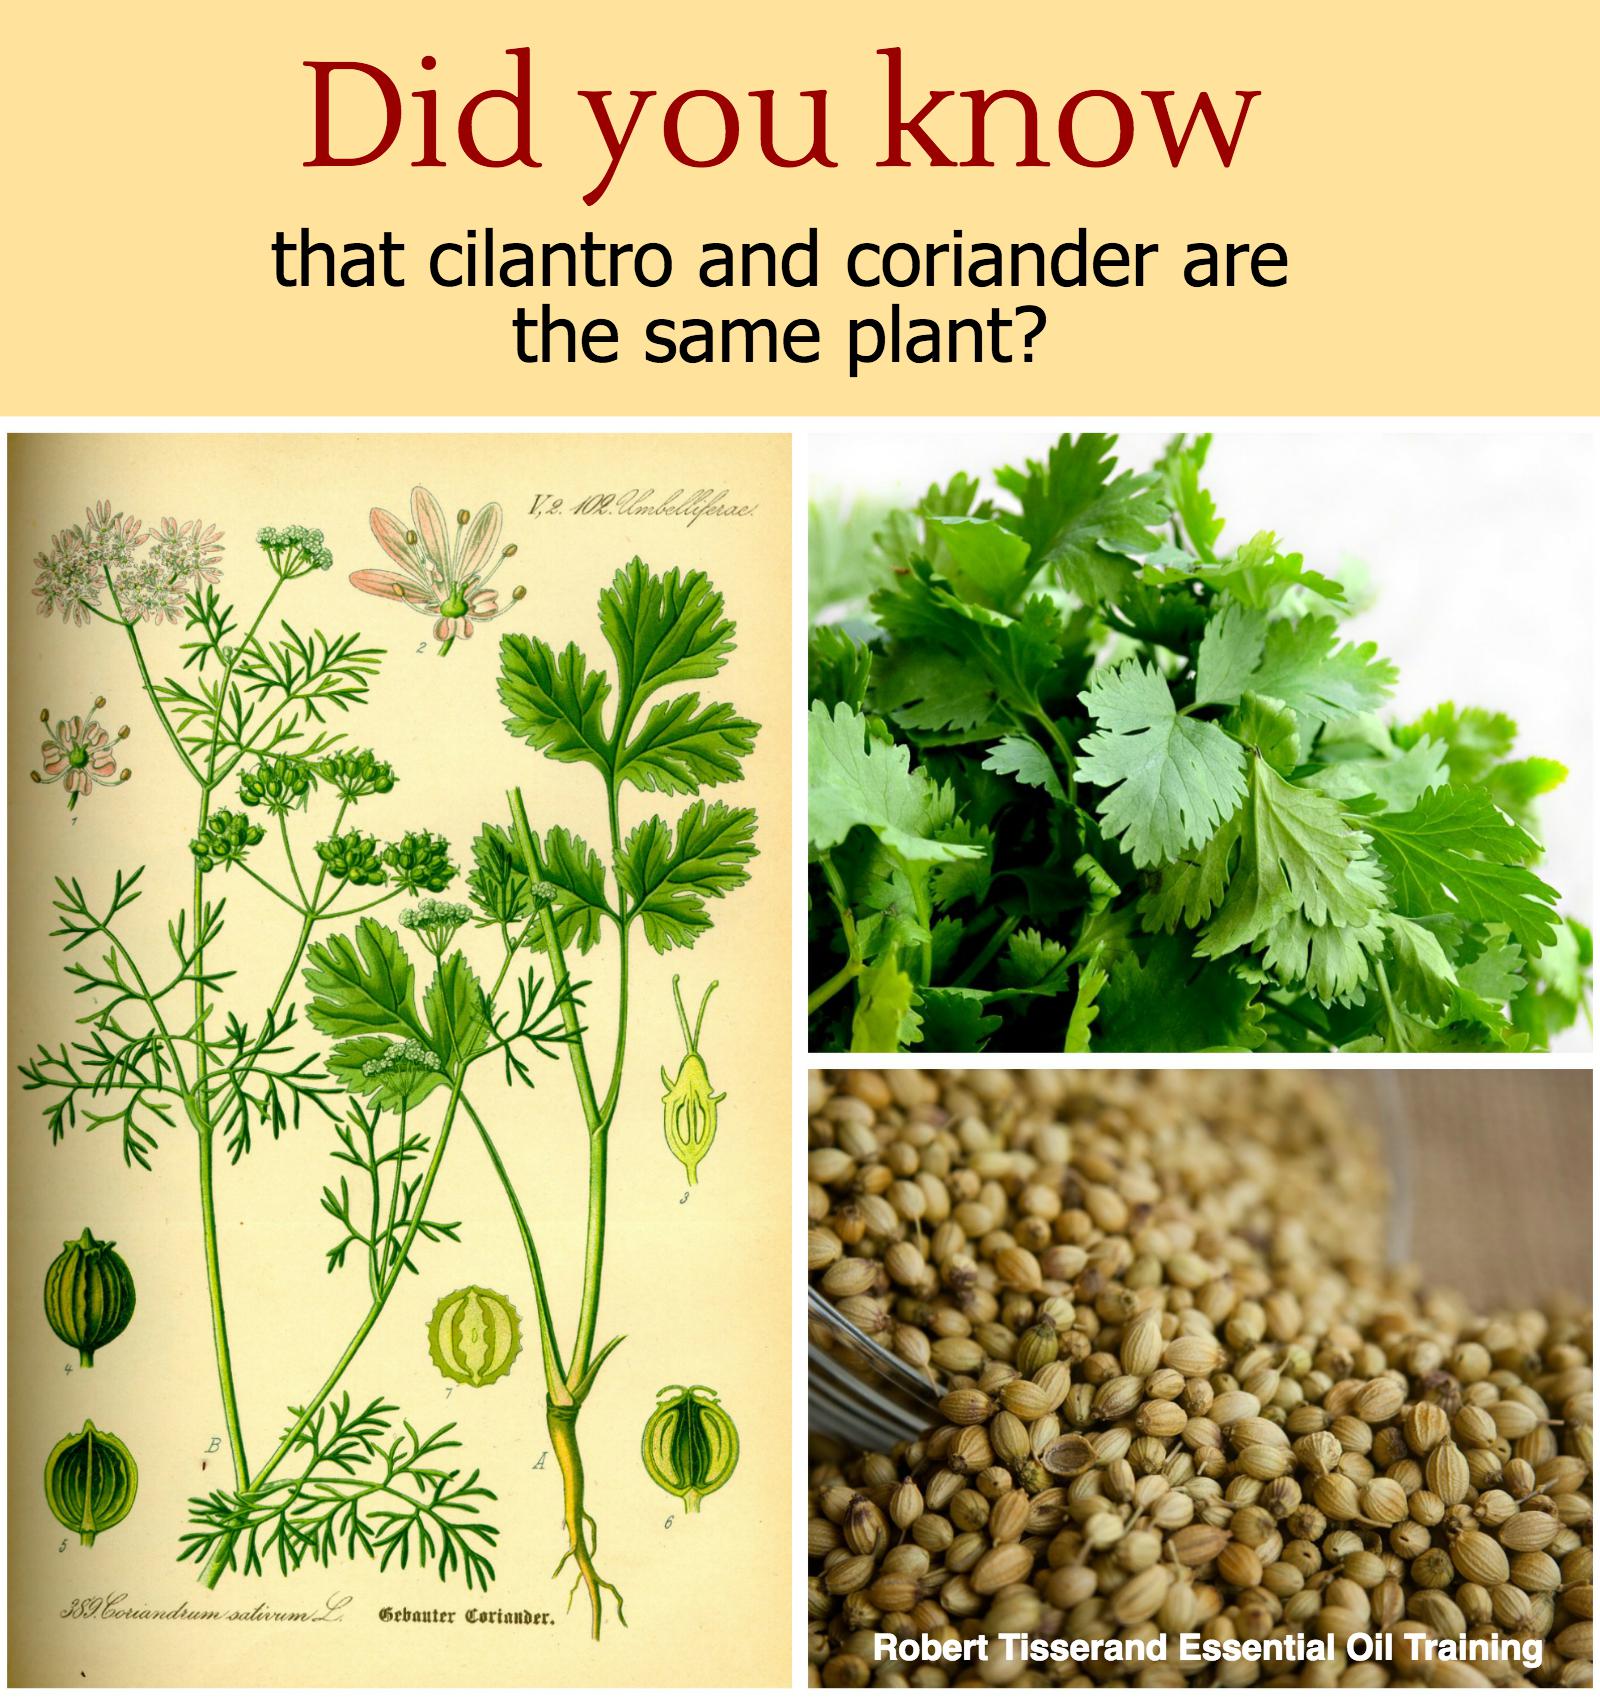 Cilantro & Coriander | Did You Know that they’re the same plant?